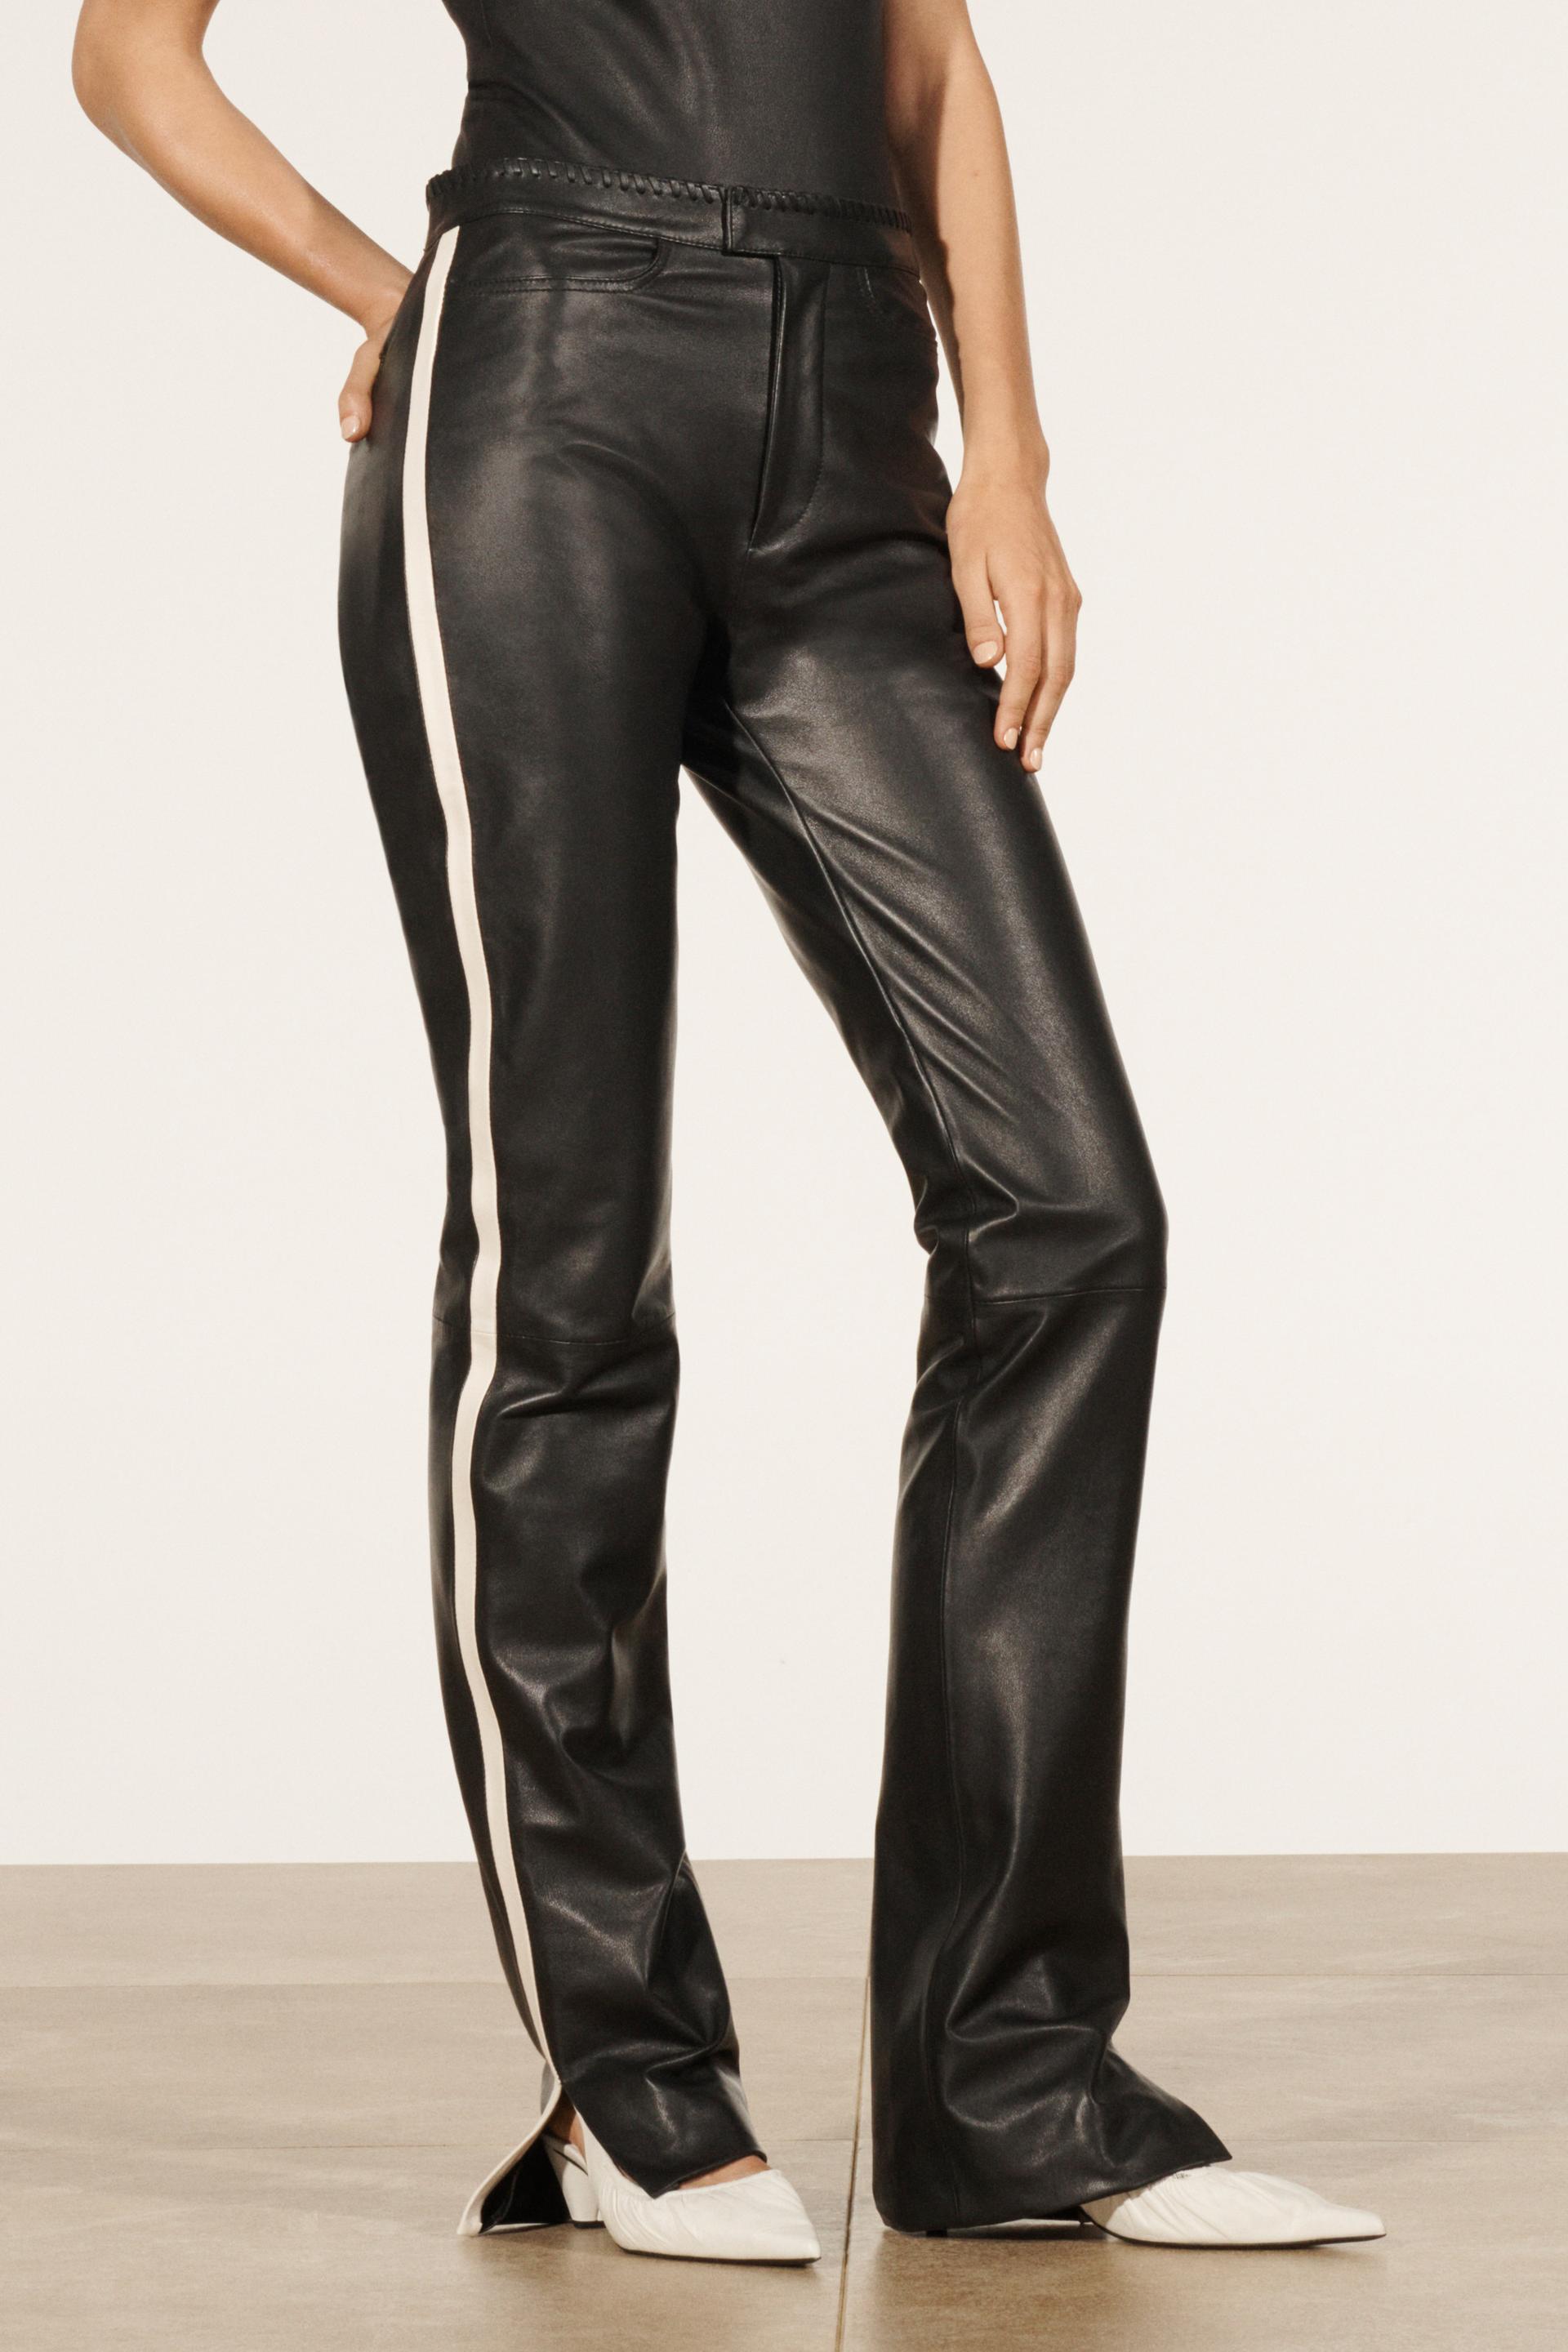 Zara Leather Pants (Brand New), Women's Fashion, Bottoms, Other